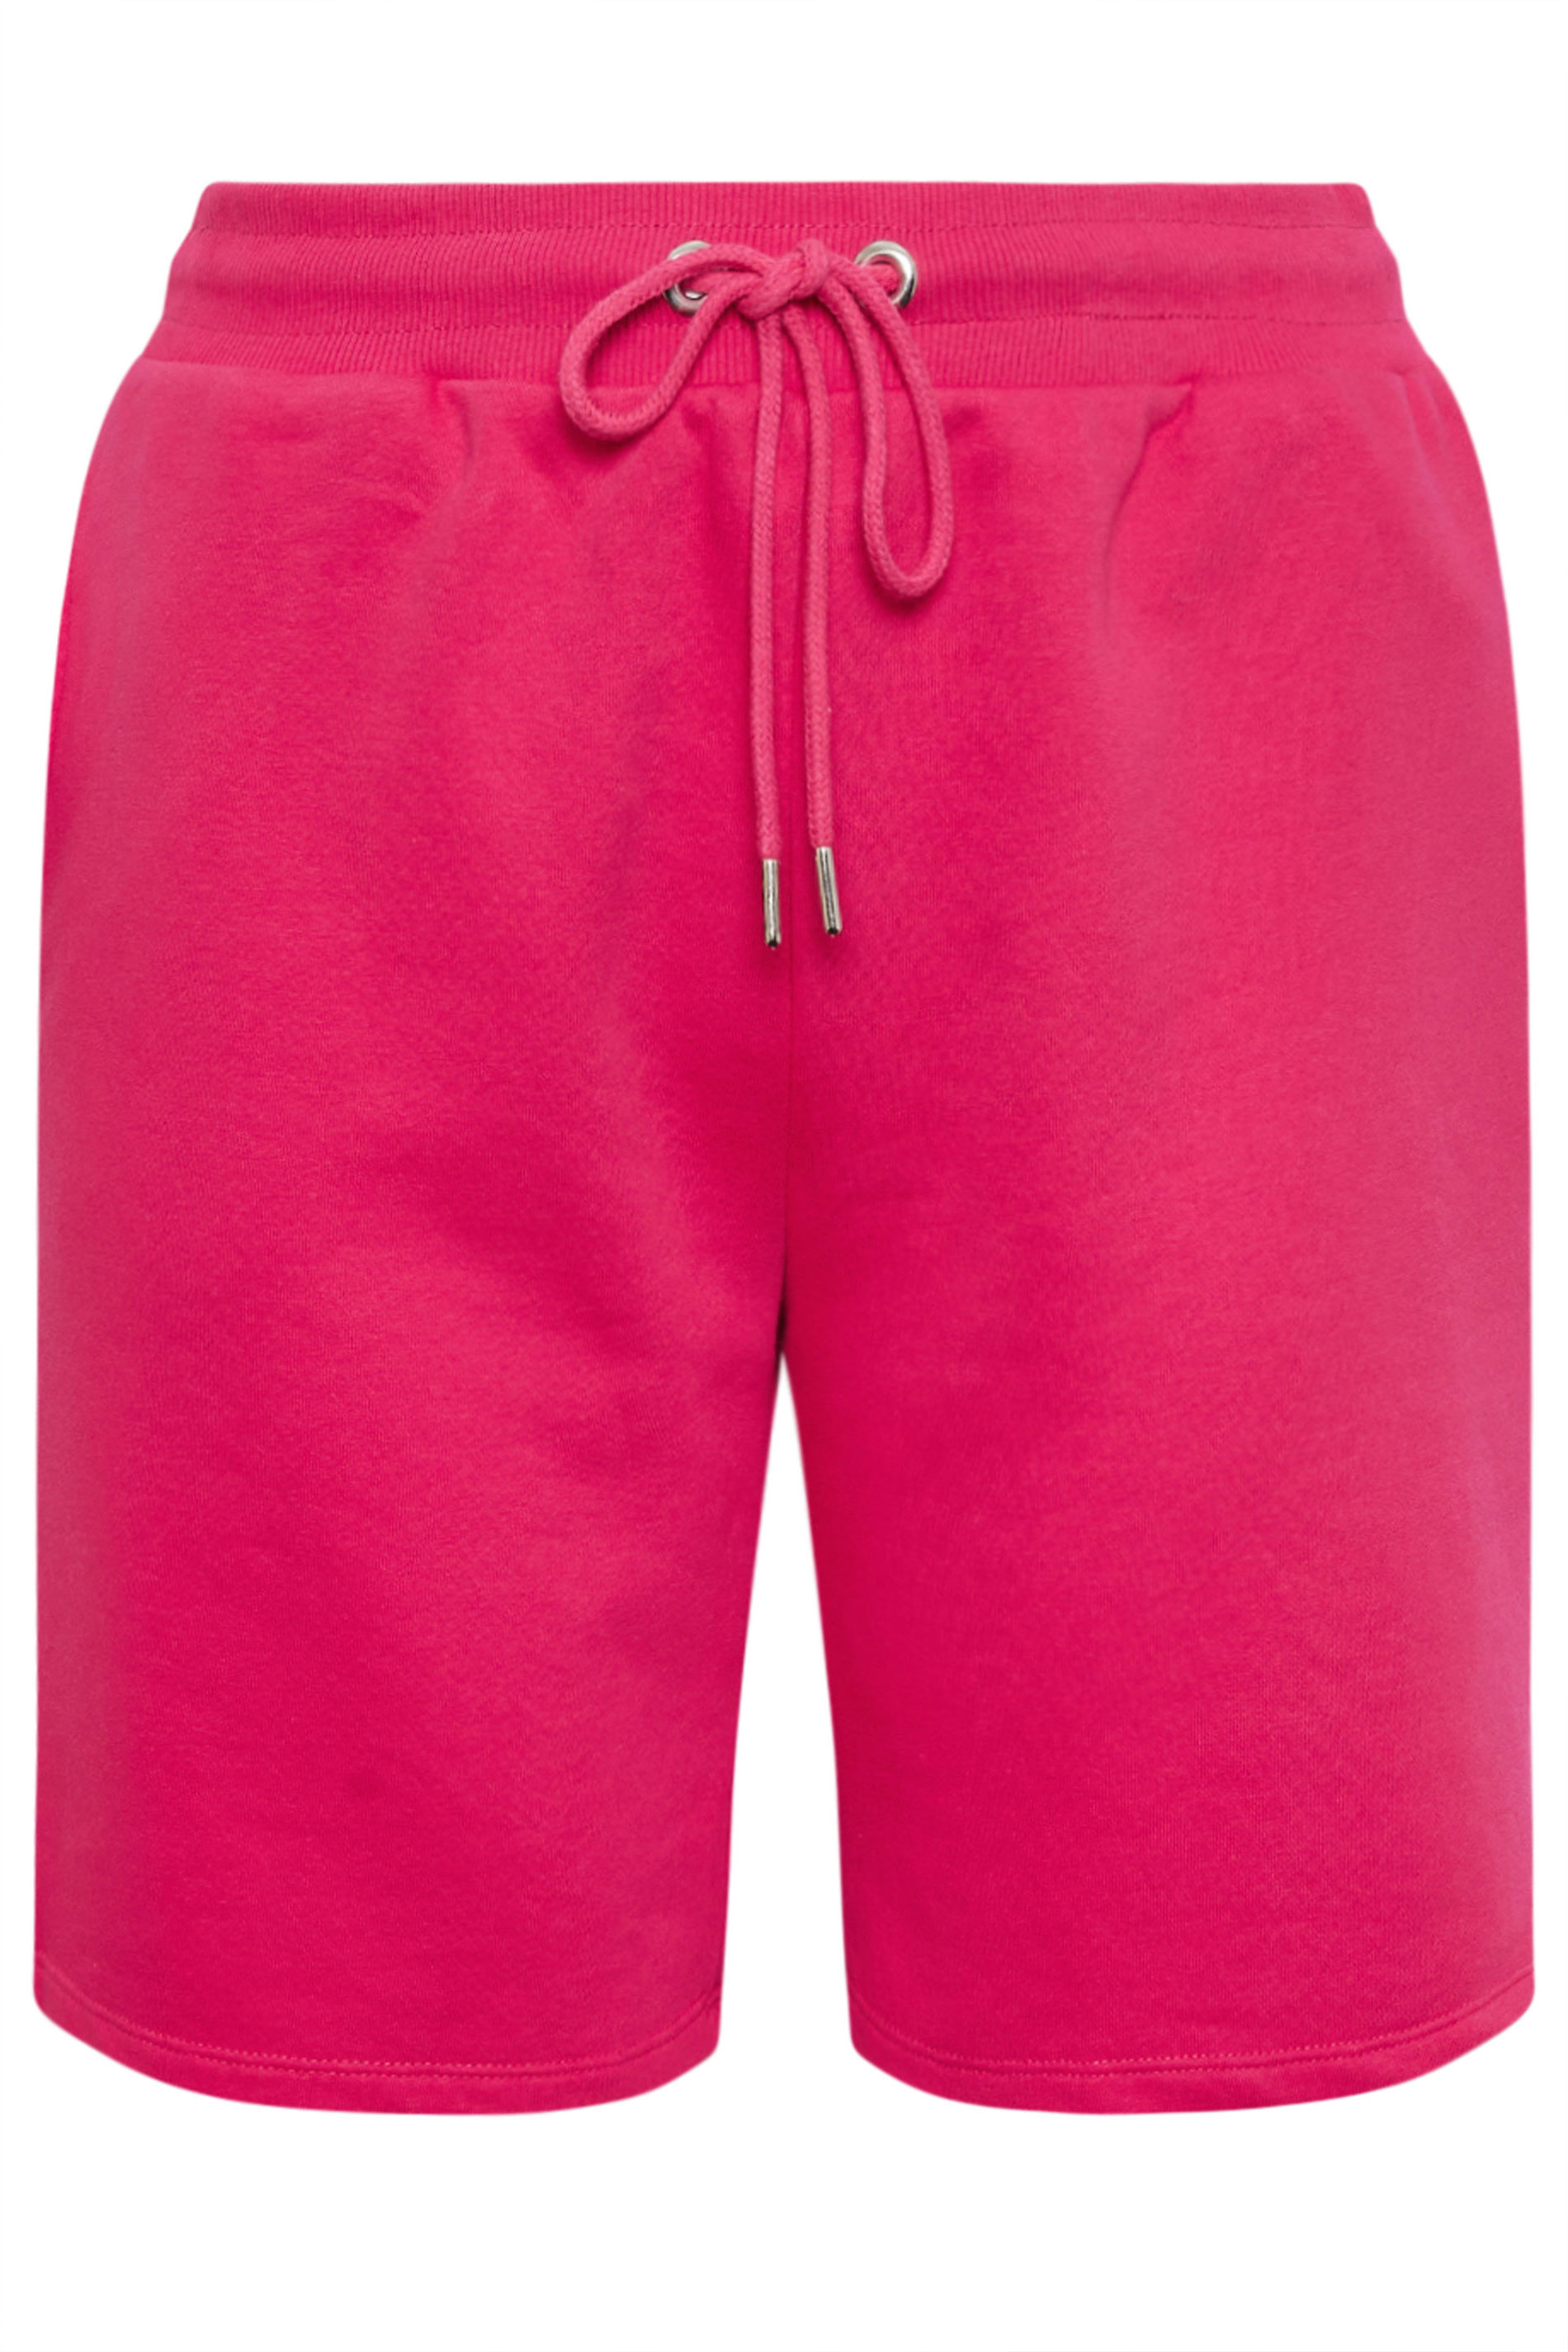 YOURS Plus Size Hot Pink Jogger Shorts